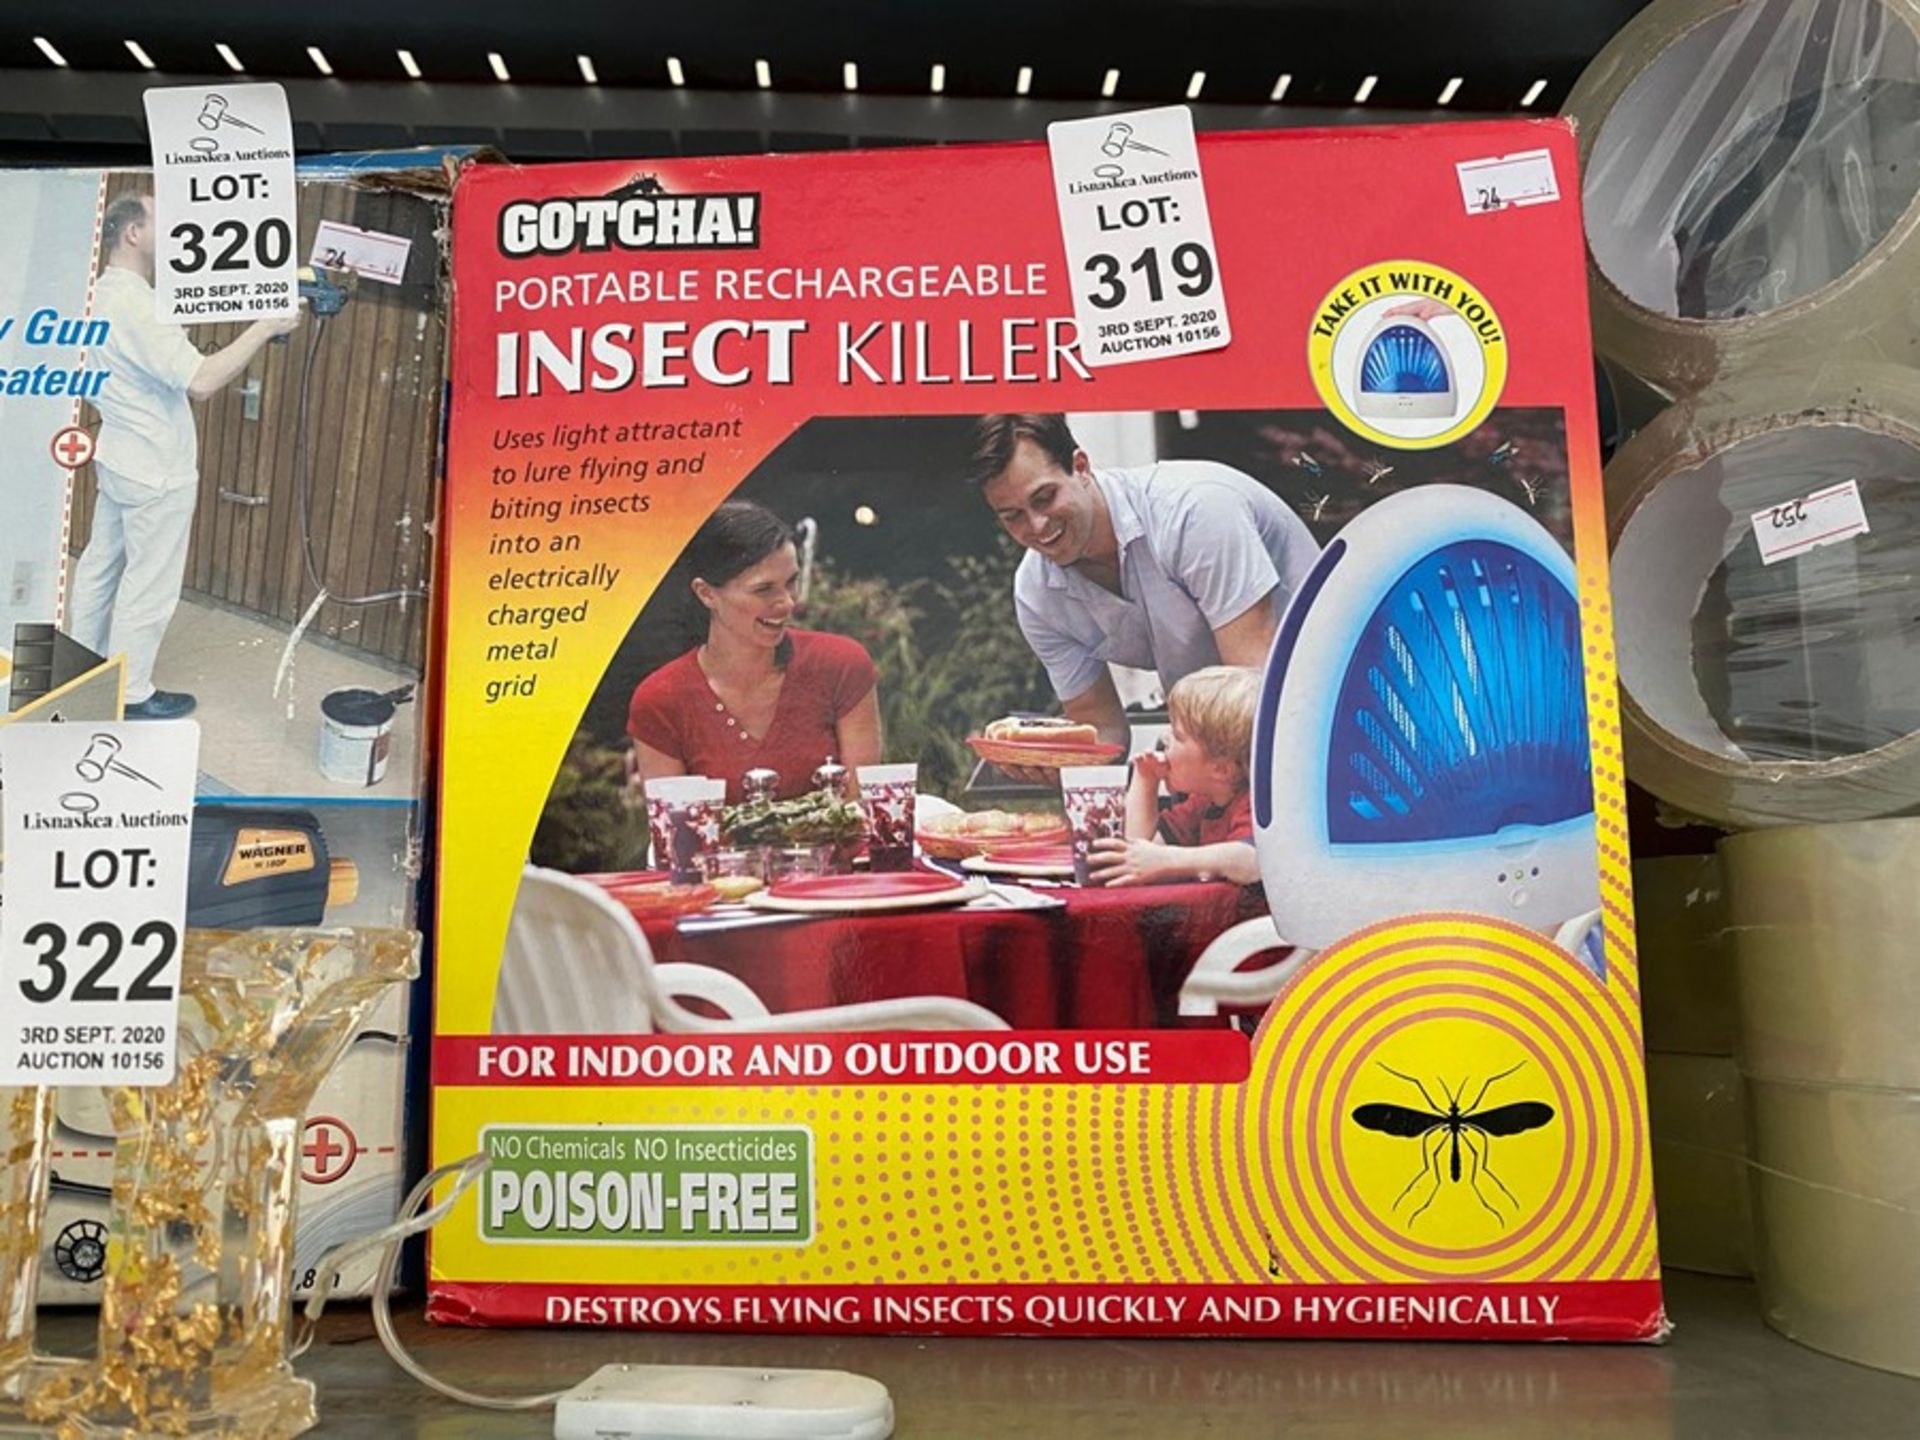 PORTABLE RECHARGEABLE INSECT KILLER